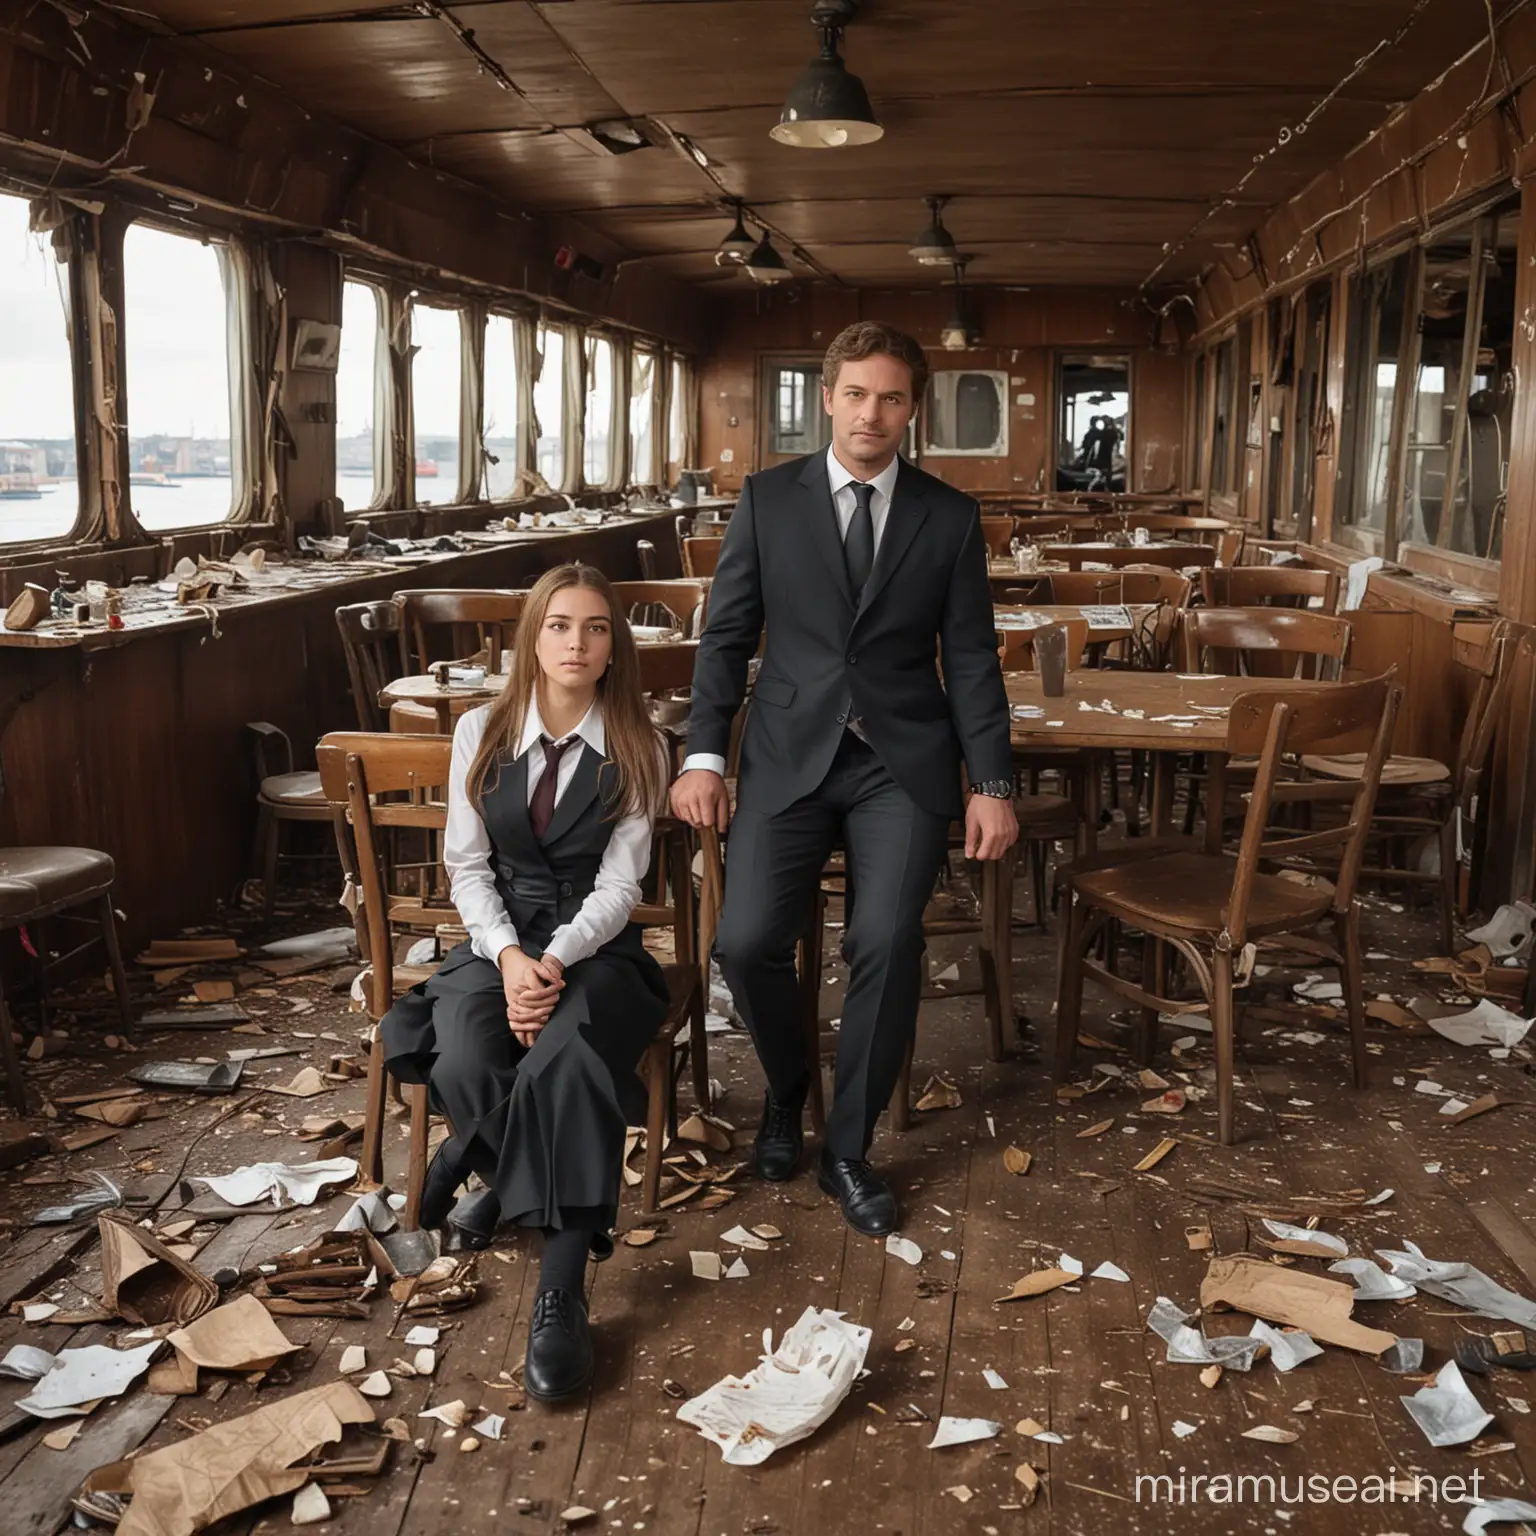 Adolescent Girl and Businessman in PostApocalyptic Restaurant